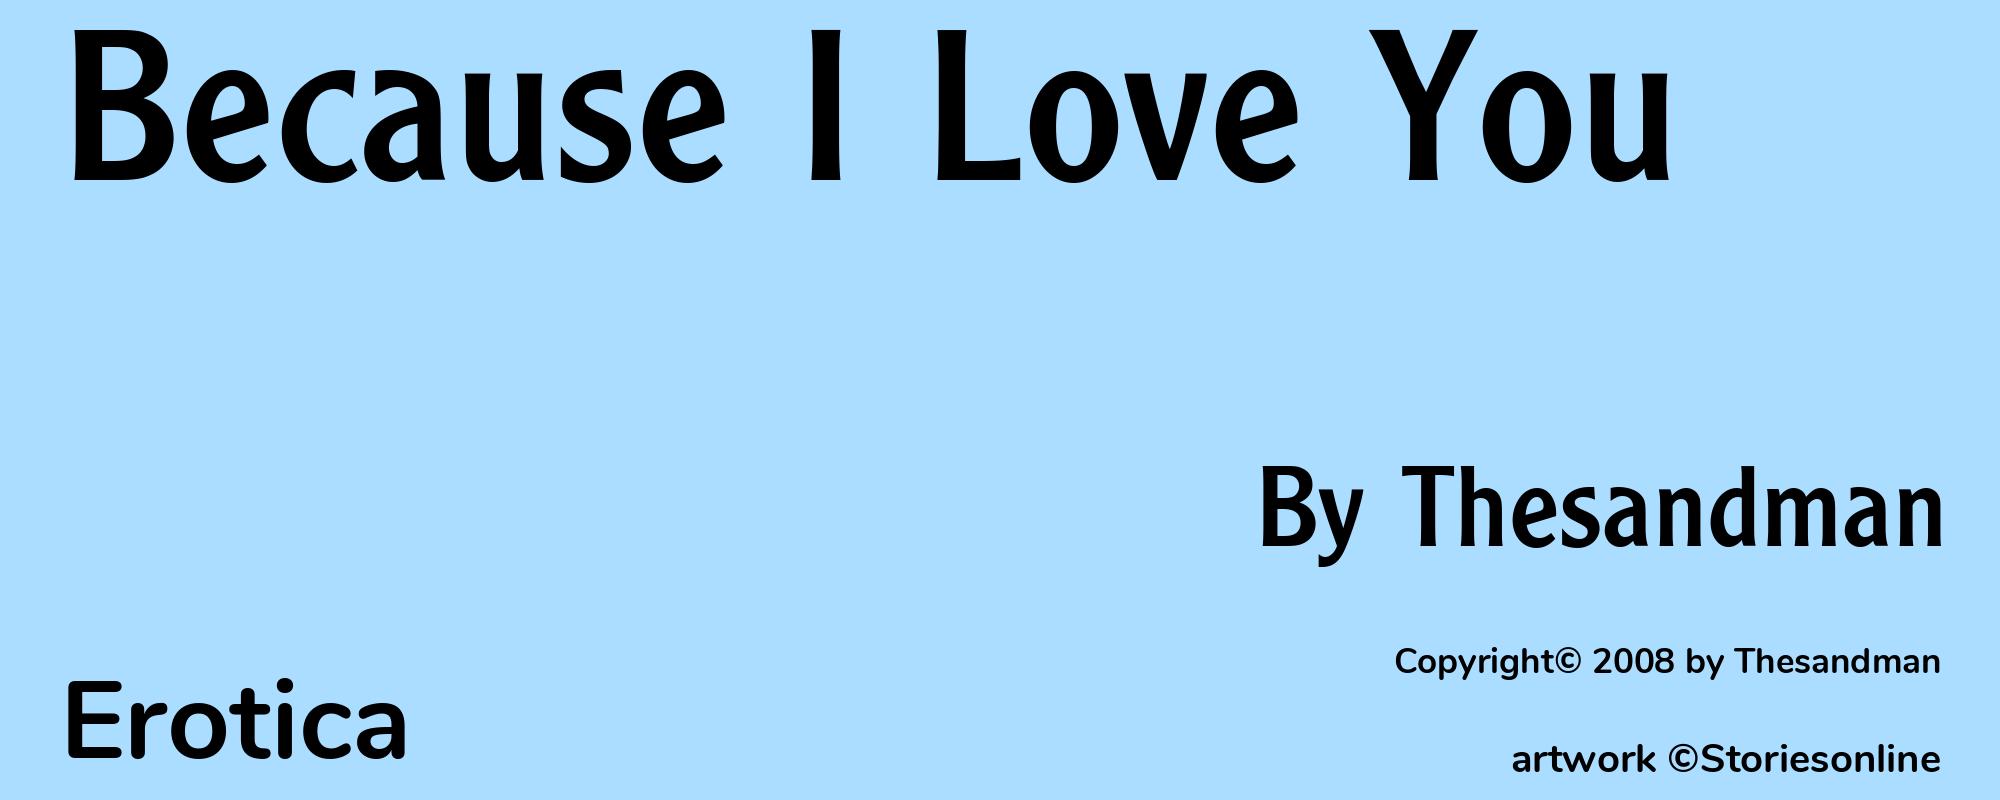 Because I Love You - Cover